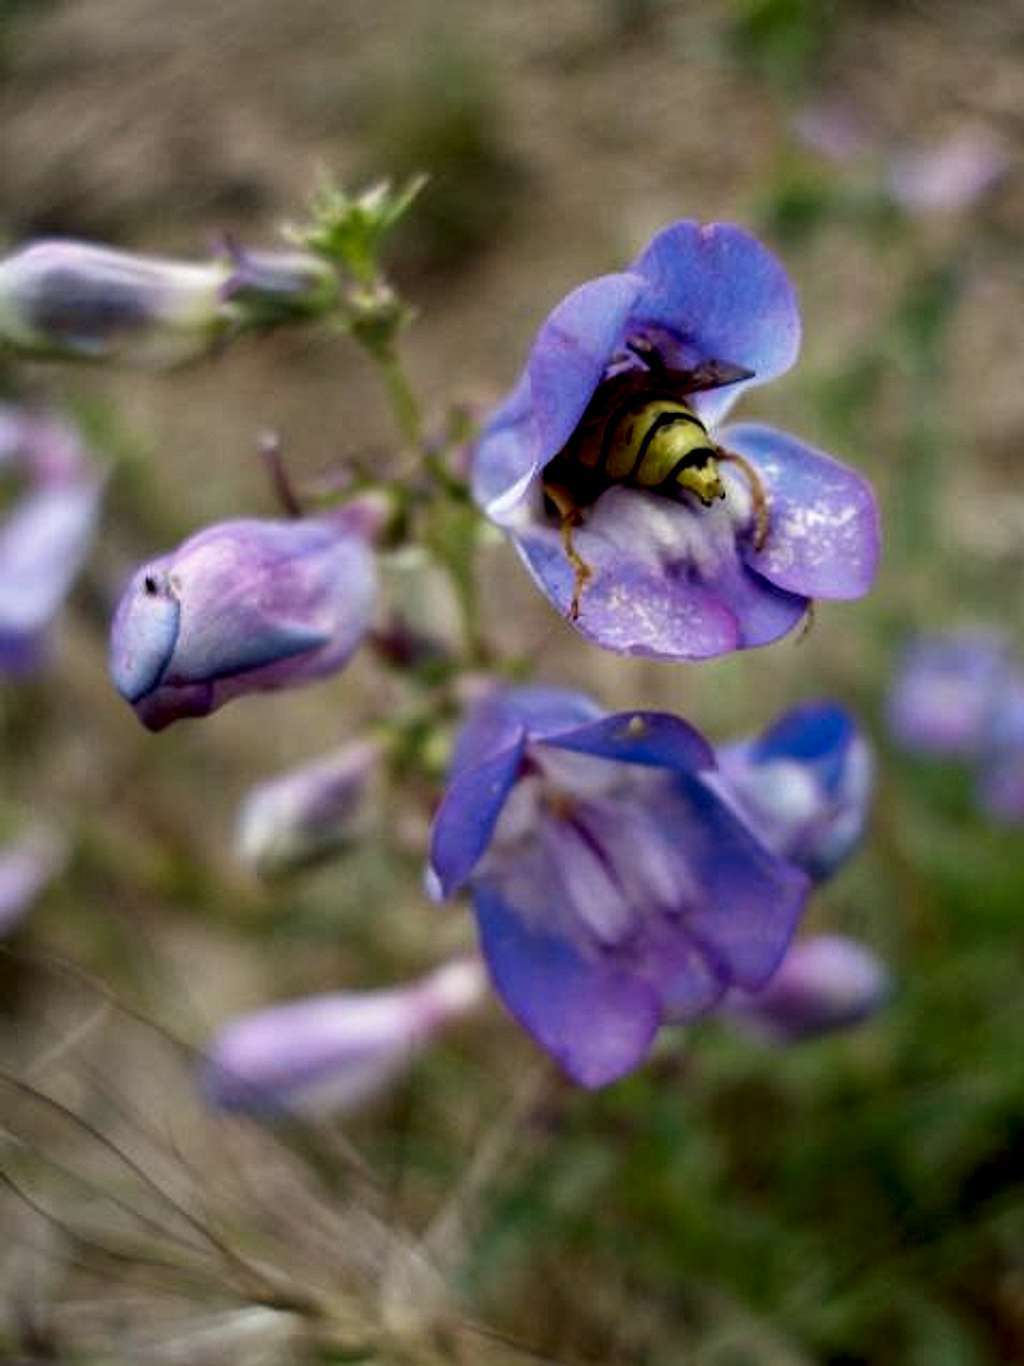 Blue Penstemon and a bee